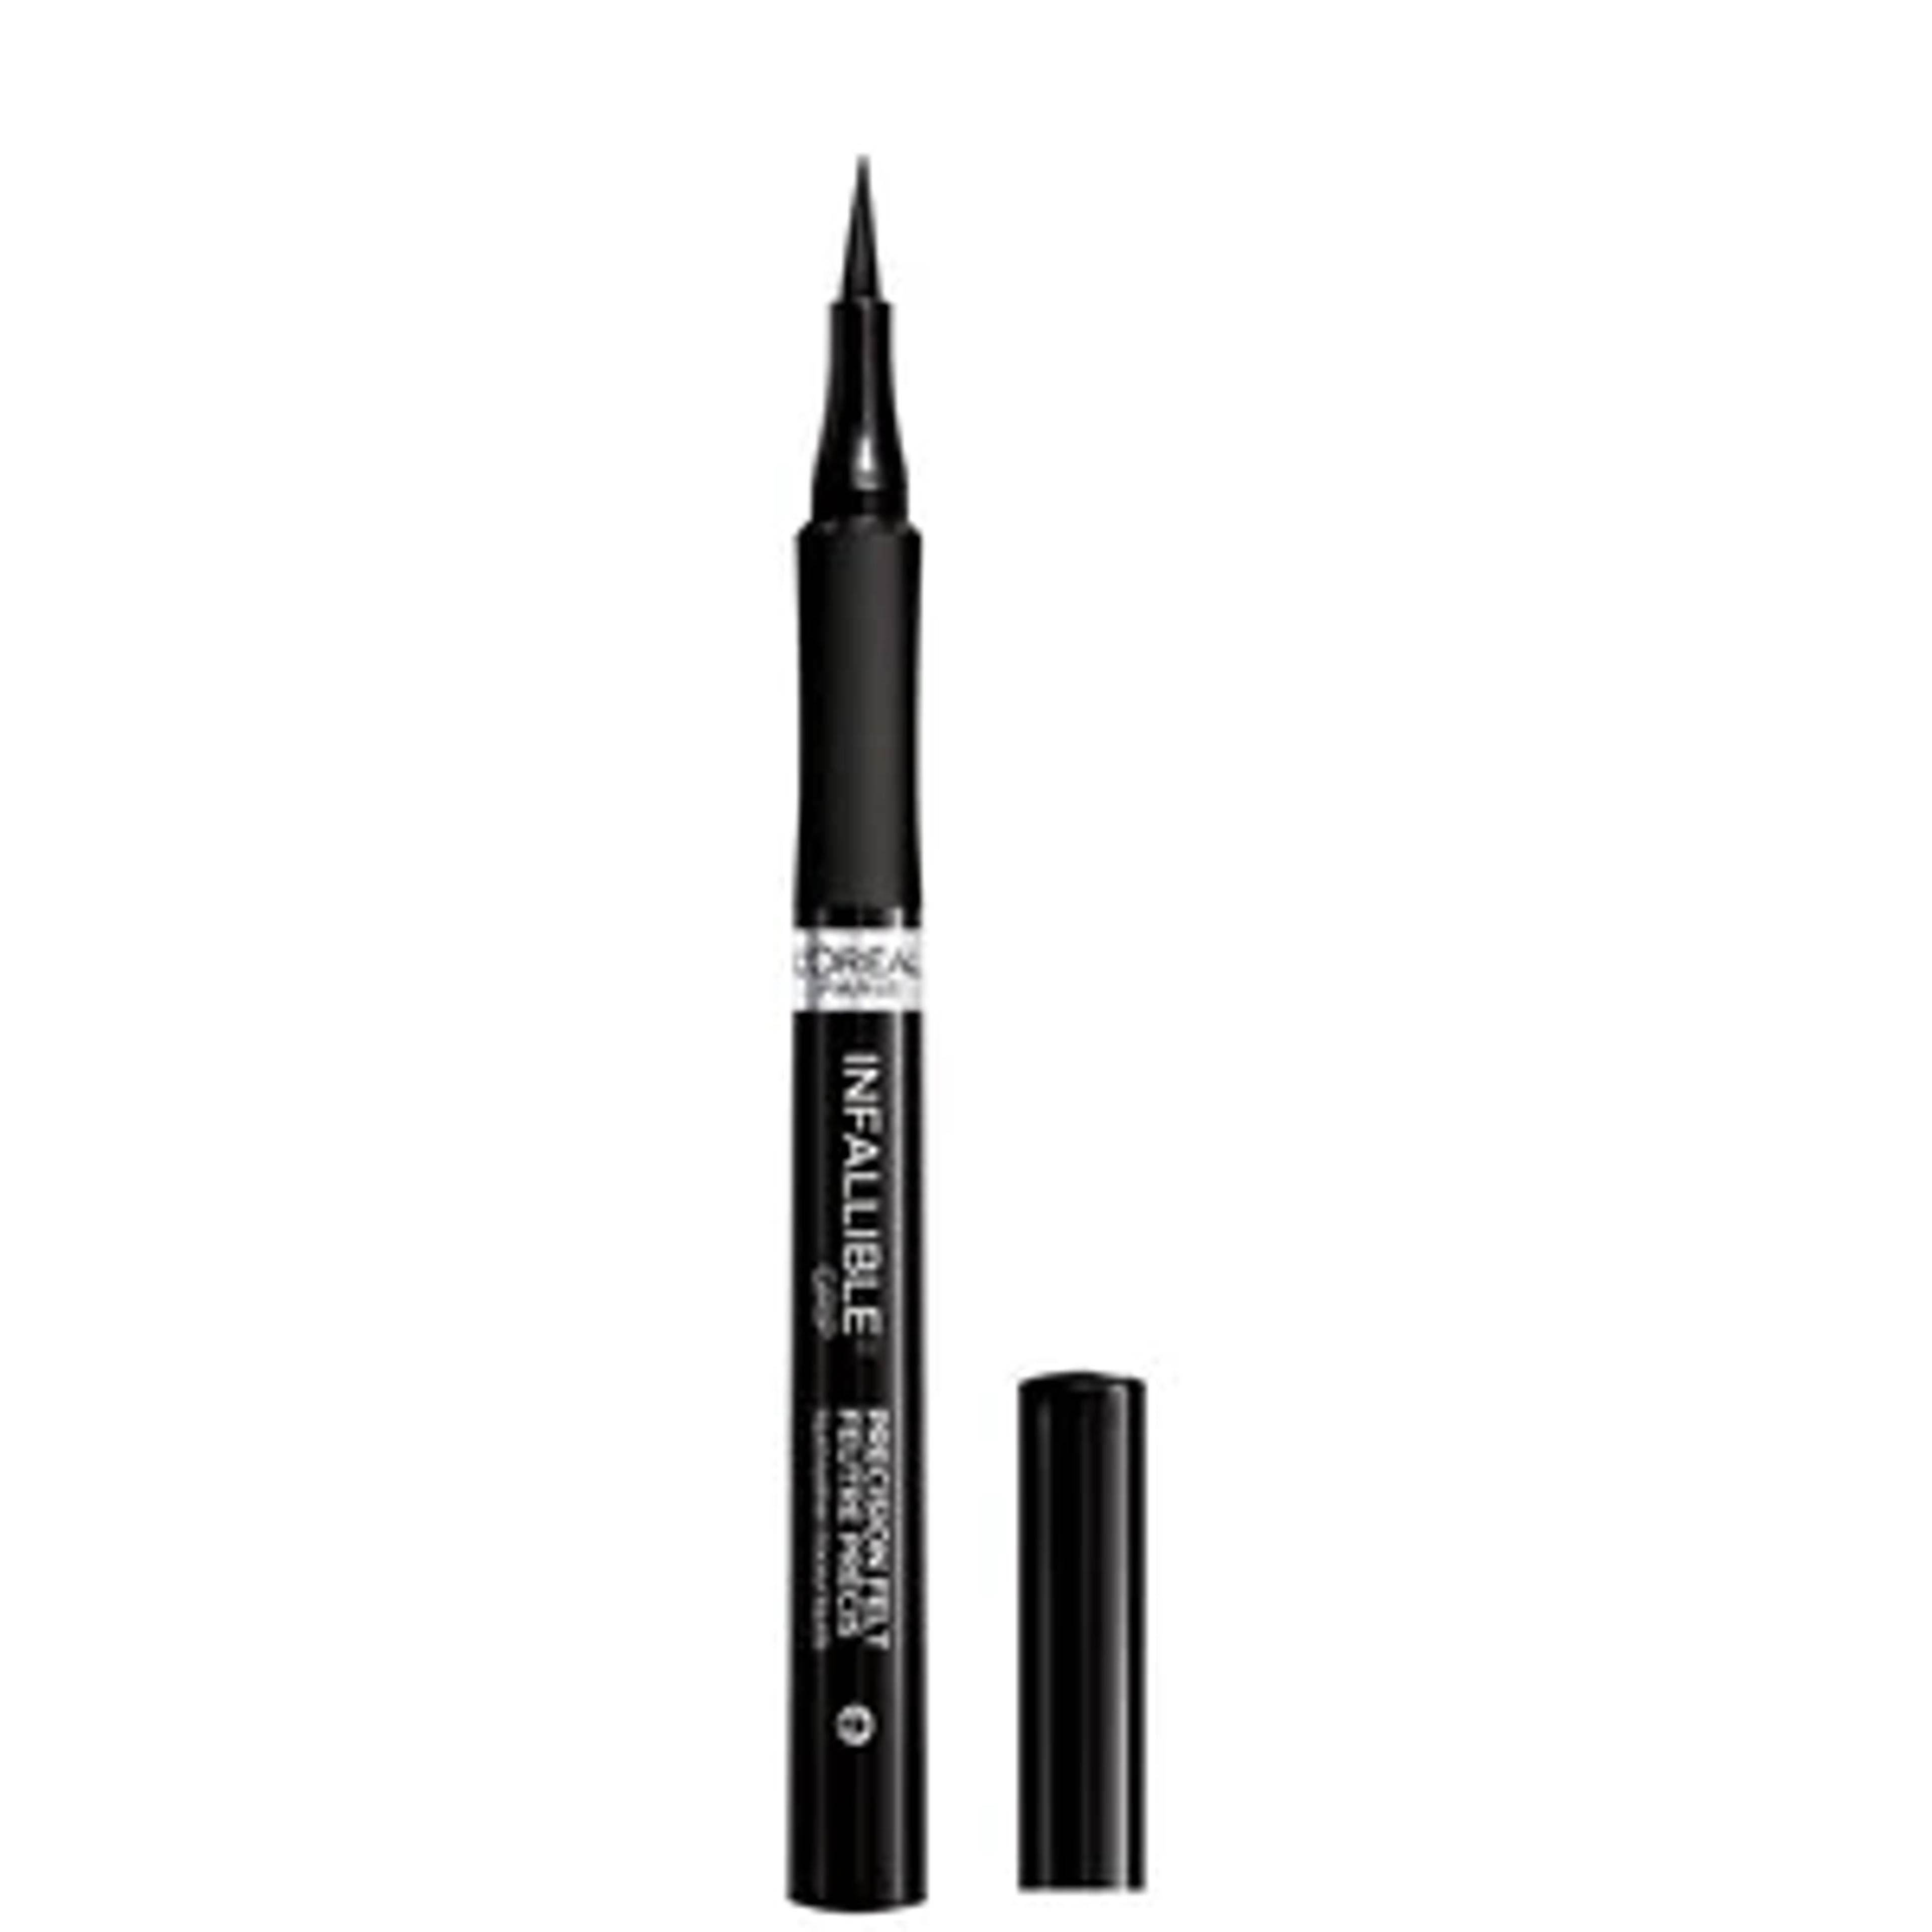 L'Oreal Paris Infallible Precision Felt Waterproof Eyeliner | Pick Up In Store TODAY at CVS